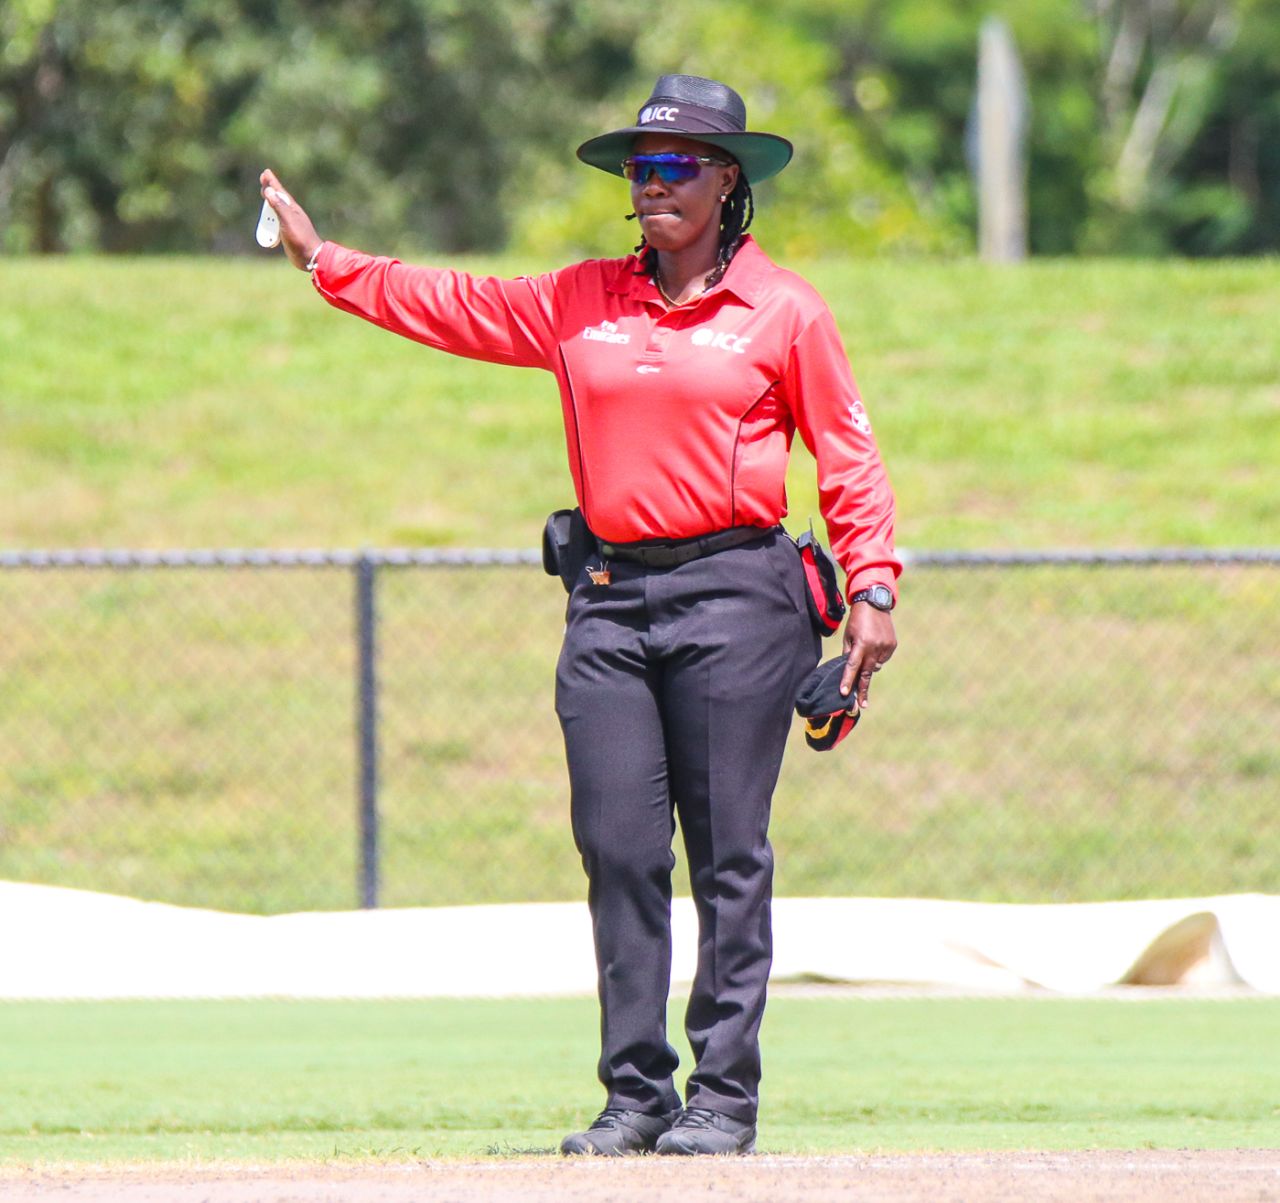 Umpire Jacqueline Williams signals a no ball while standing in her first men's ODI series, USA v Papua New Guinea, Cricket World Cup League Two tri-series, Lauderhill, September 19, 2019